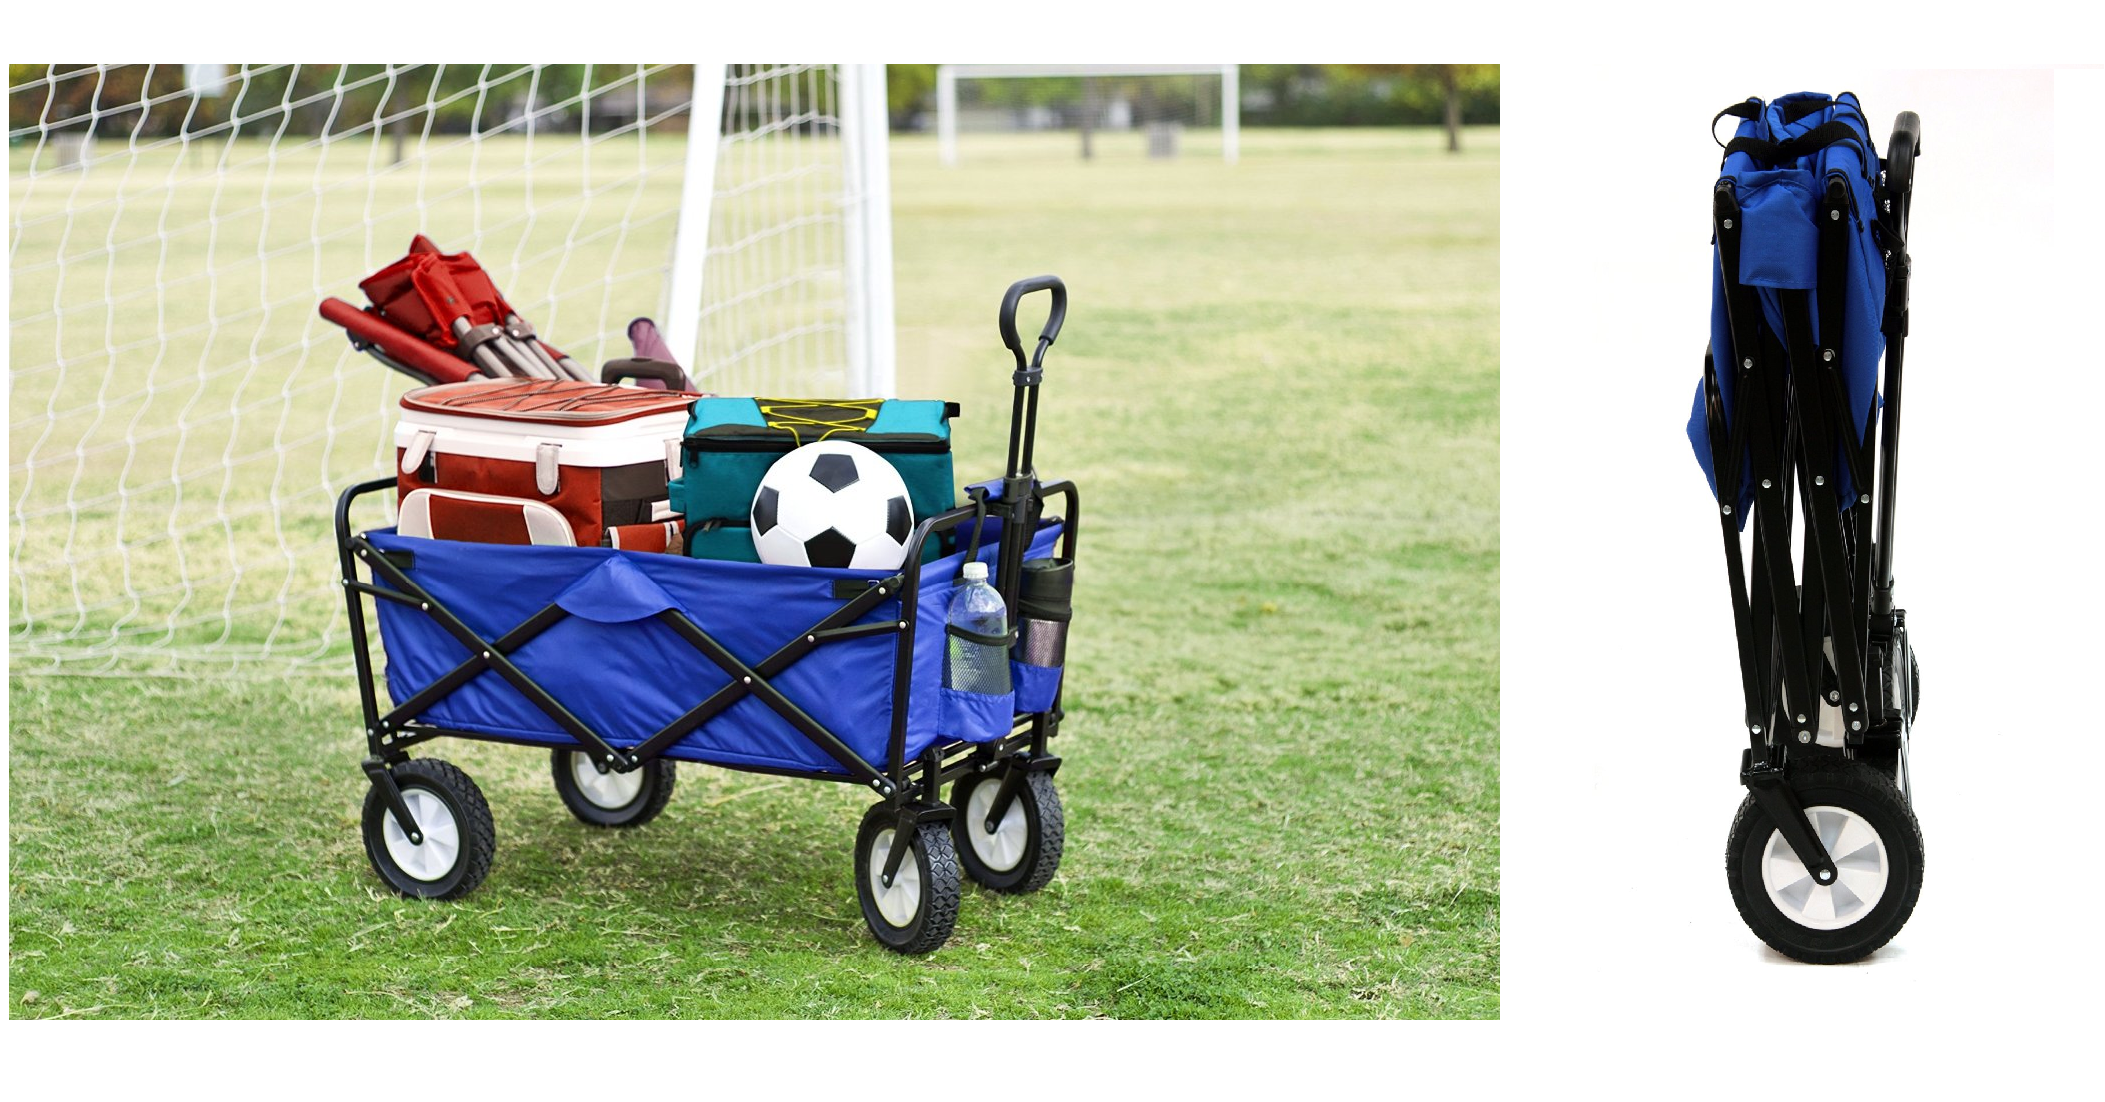 Mac Sports Collapsible Folding Outdoor Utility Wagon Just $62.01! (#1 Best Seller!)